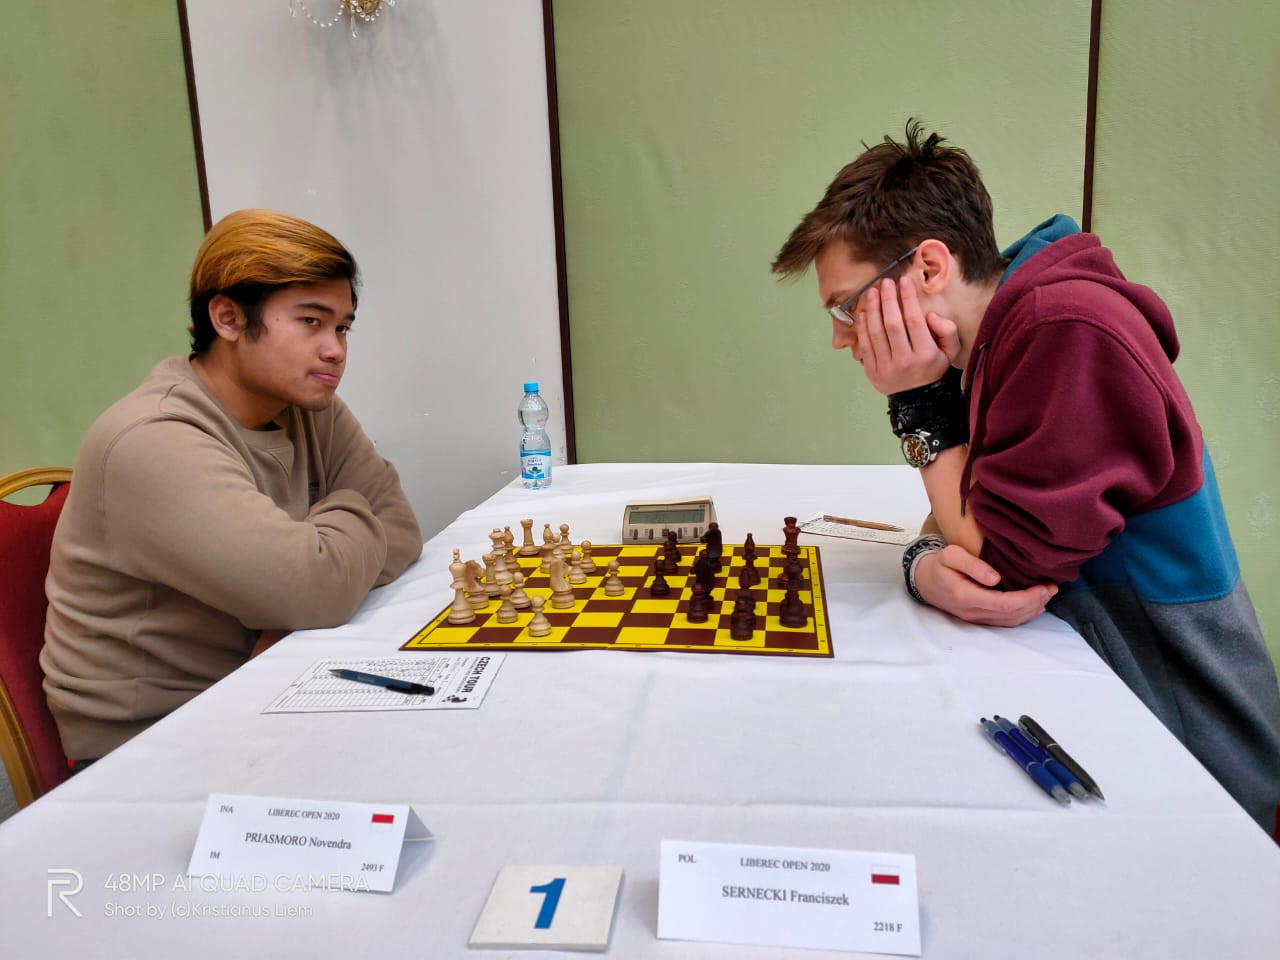 Indonesian Chess Player Beats Online Grand Master, Causes Backlash